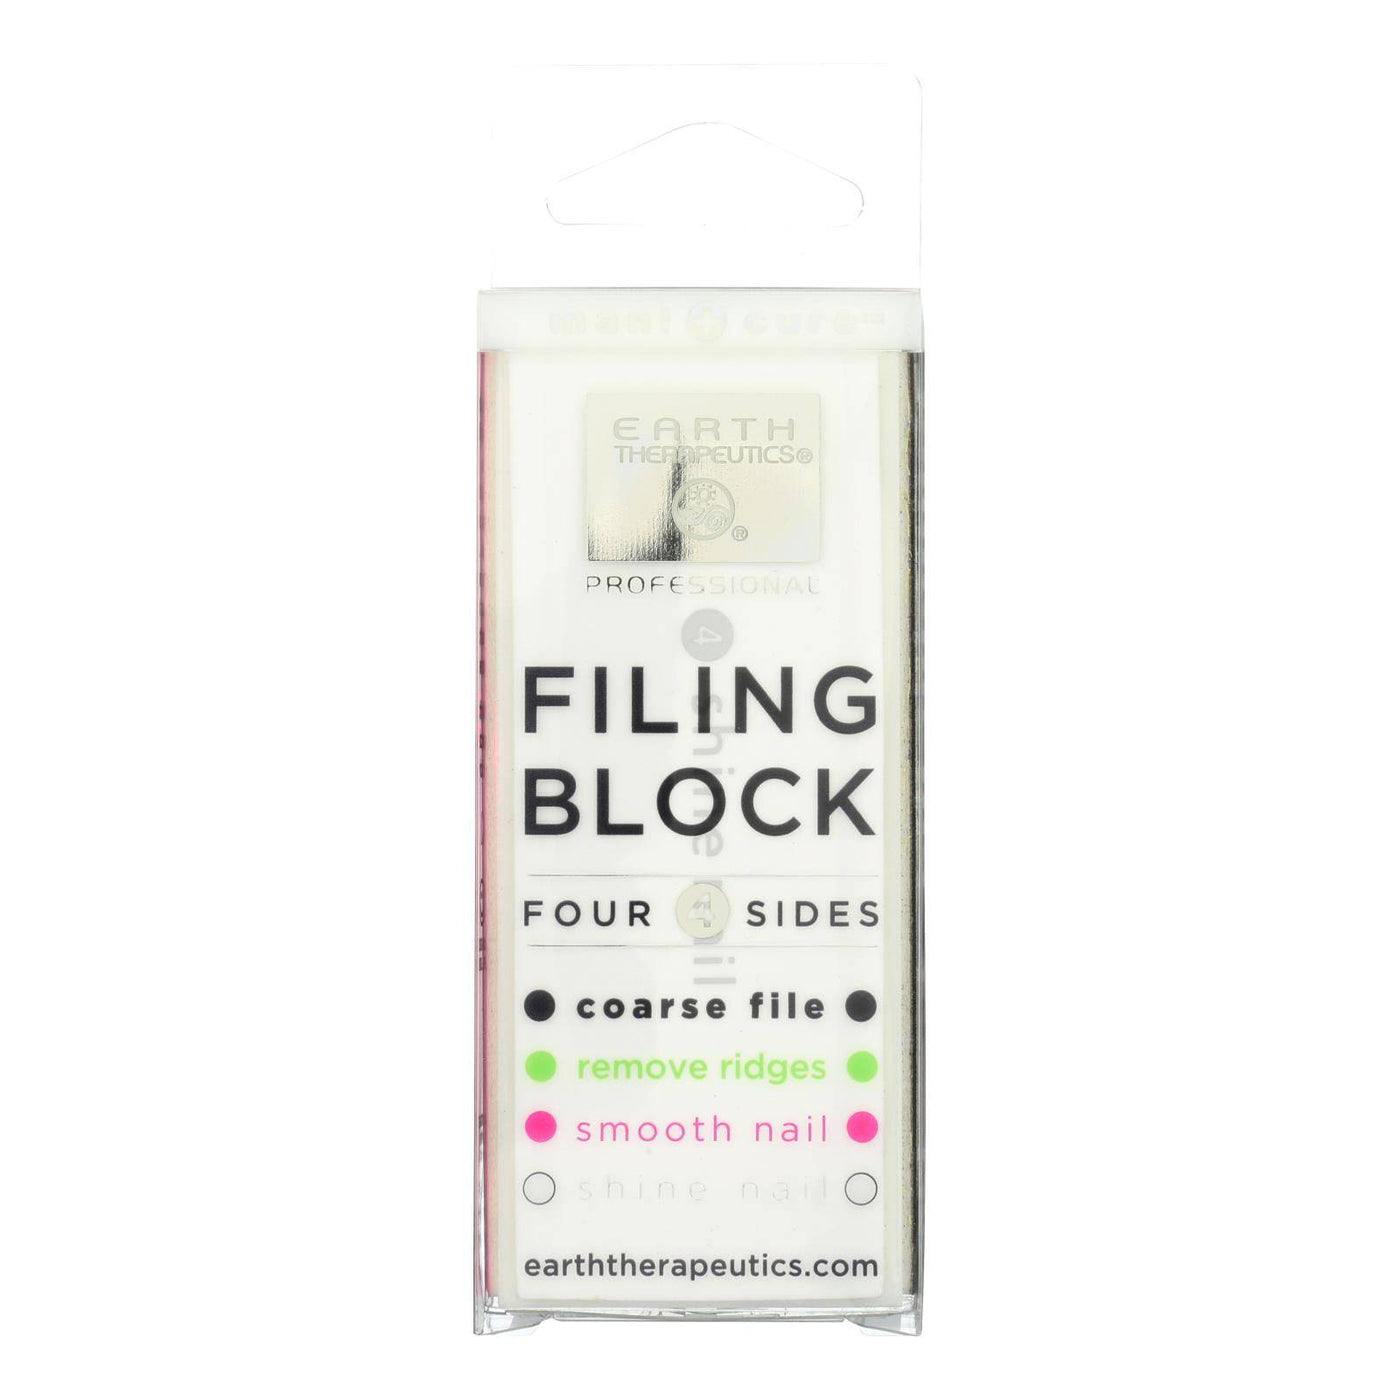 Buy Earth Therapeutics Filing Block - 1 File  at OnlyNaturals.us